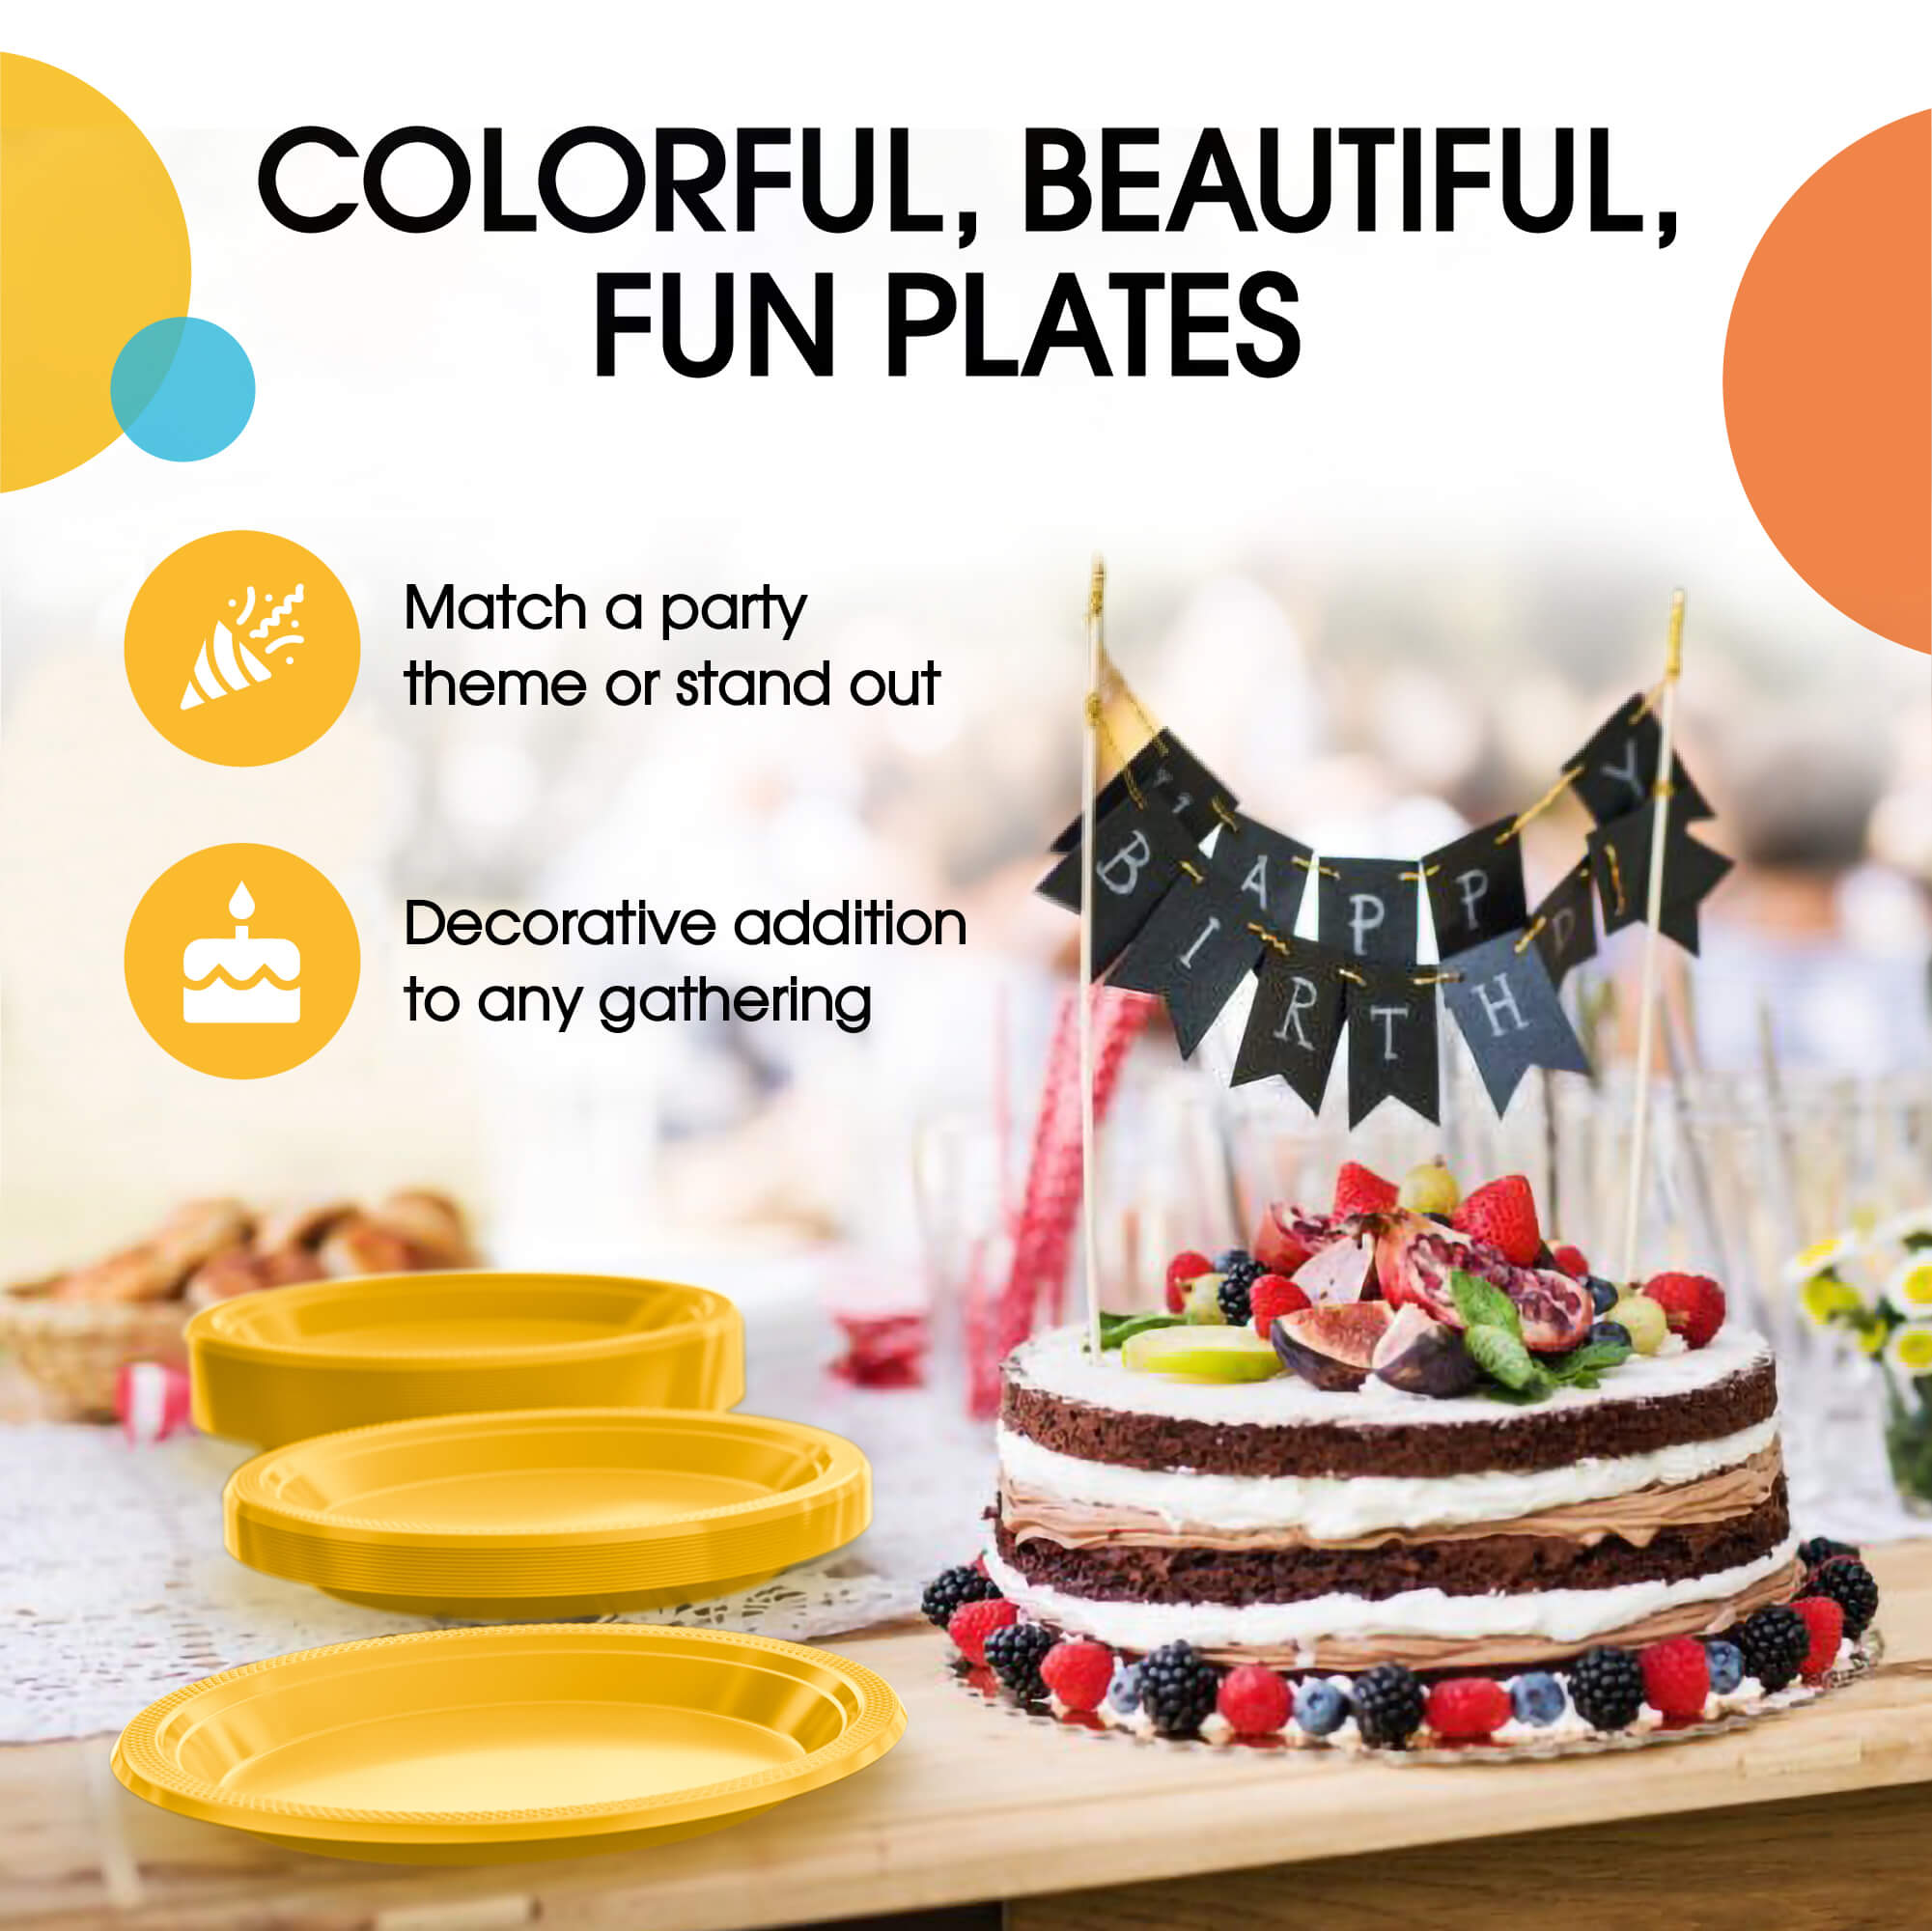 7 In. Yellow Plastic Plates | 8 Count